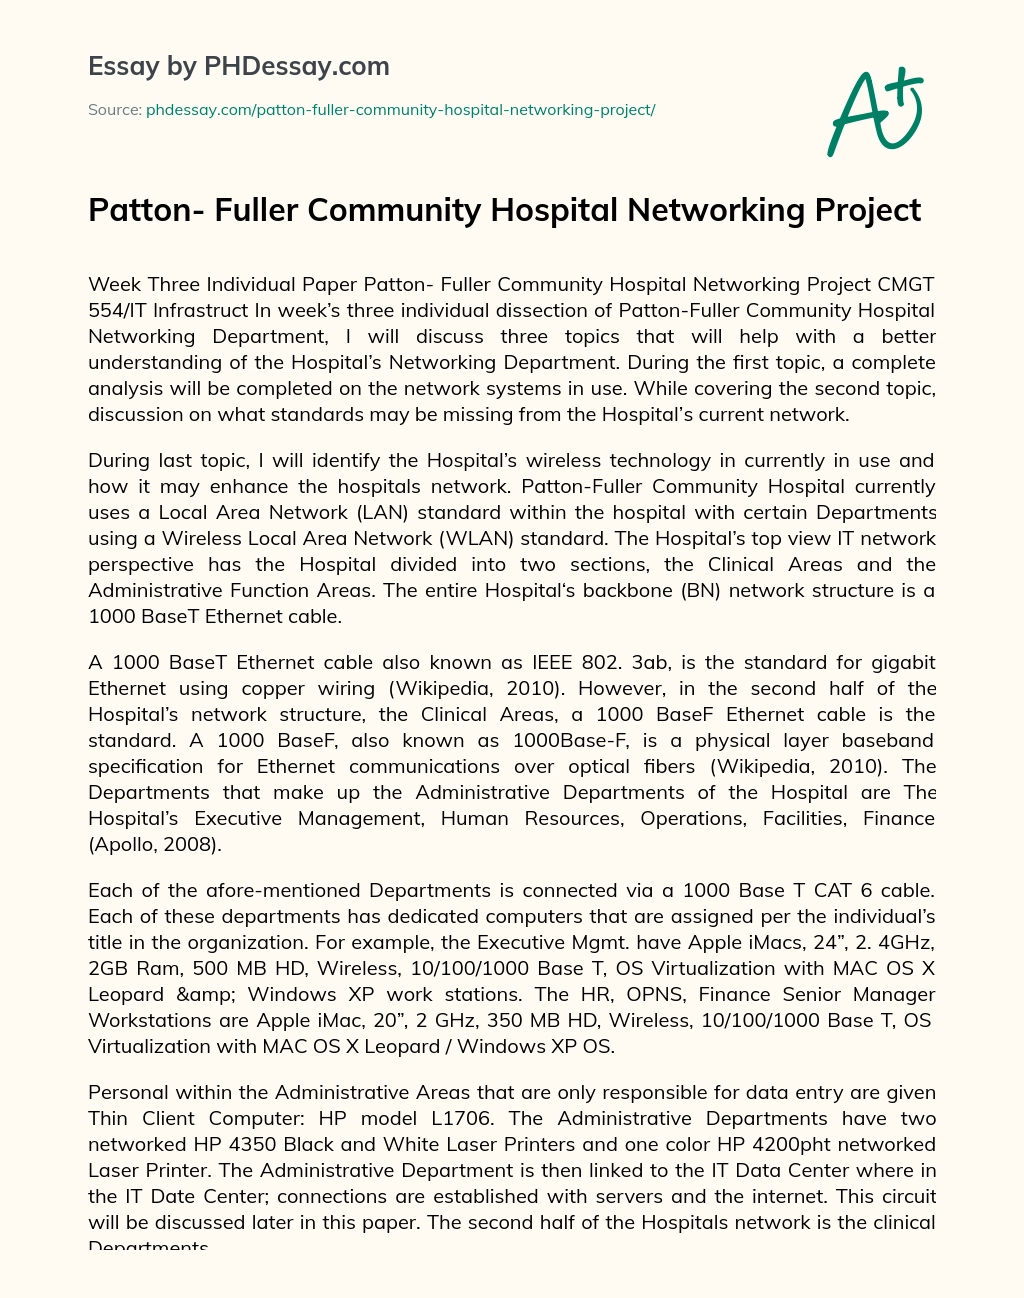 Patton-Fuller Community Hospital Networking Project essay